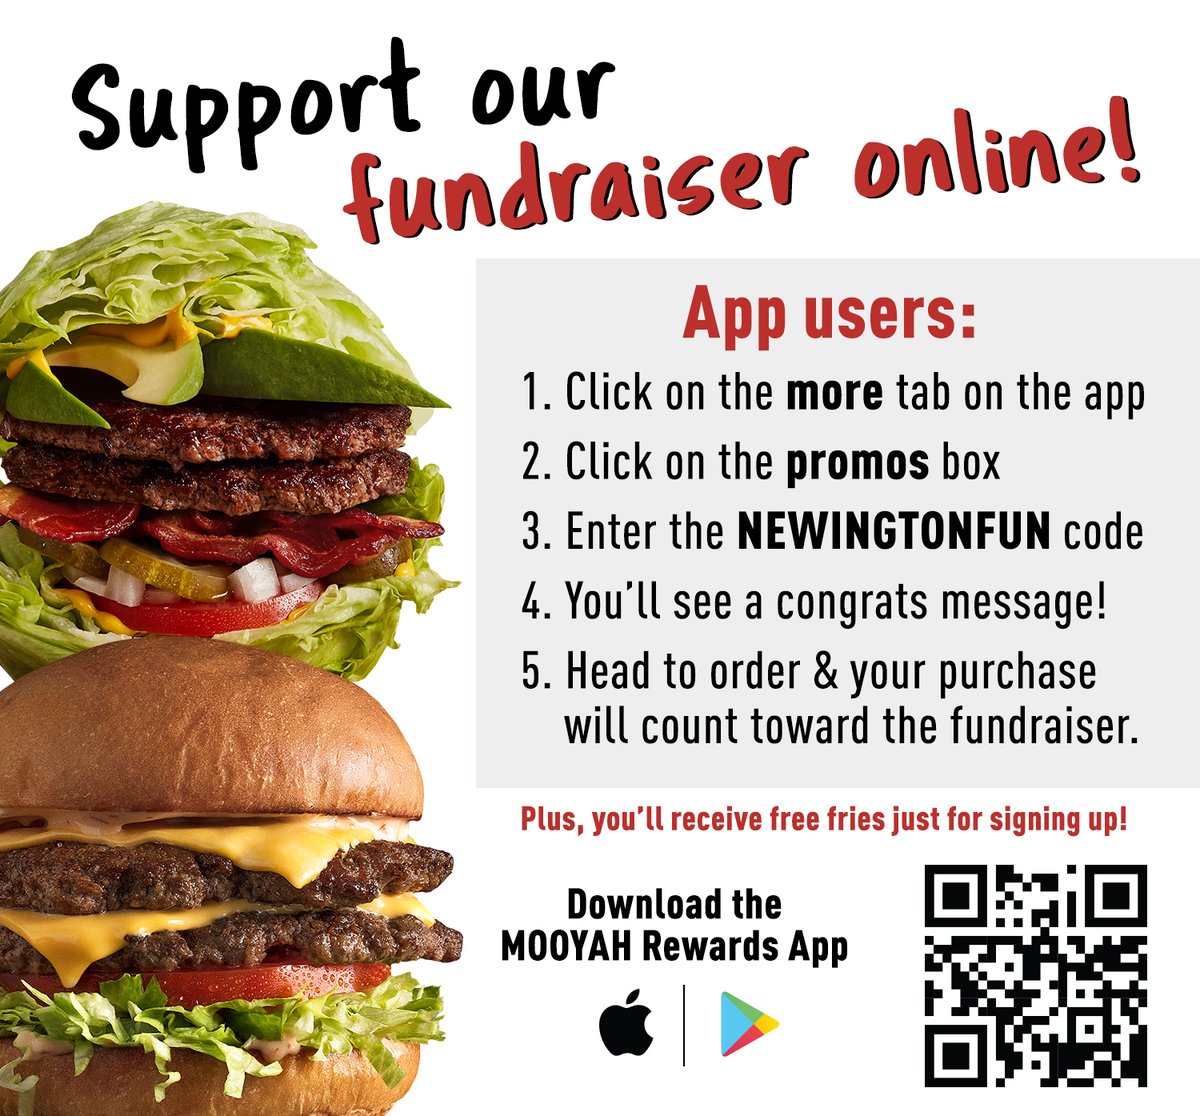 Support @MagnetTrinity today for lunch or dinner @MOOYAHBurgers, 24 Fenn Rd., Newington CT 12-9 pm. Mention the fundraiser at the time of order or use promo code NEWINGTONFUN when ordering with the rewards app!